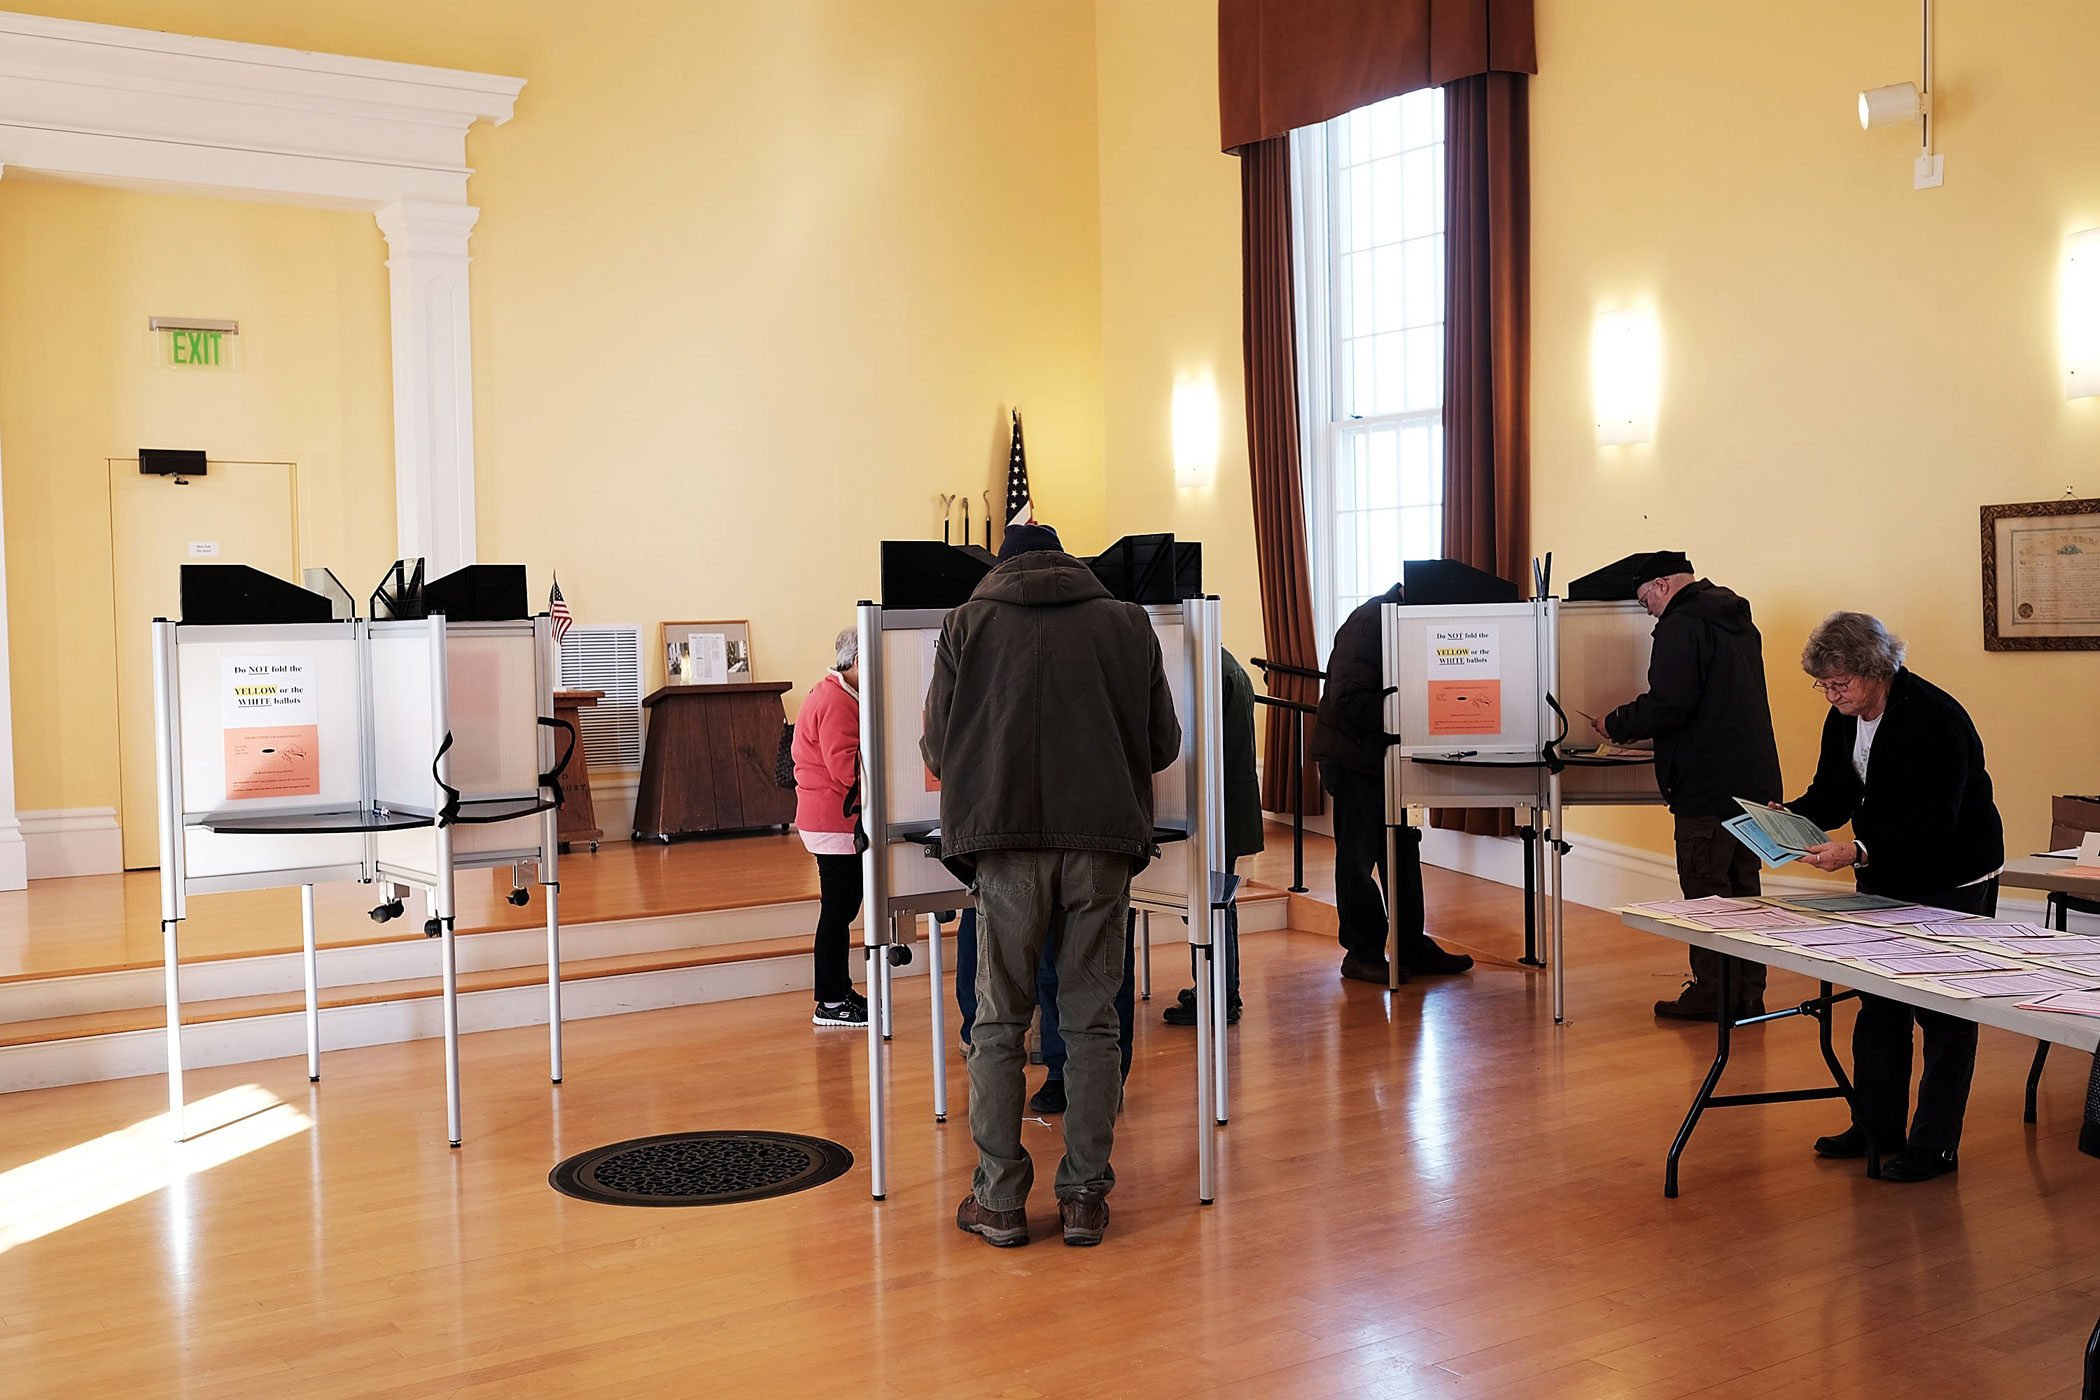 People vote in a church being used as a polling station on Tuesday, March 1, 2016 in Ferrisburgh, Vt.